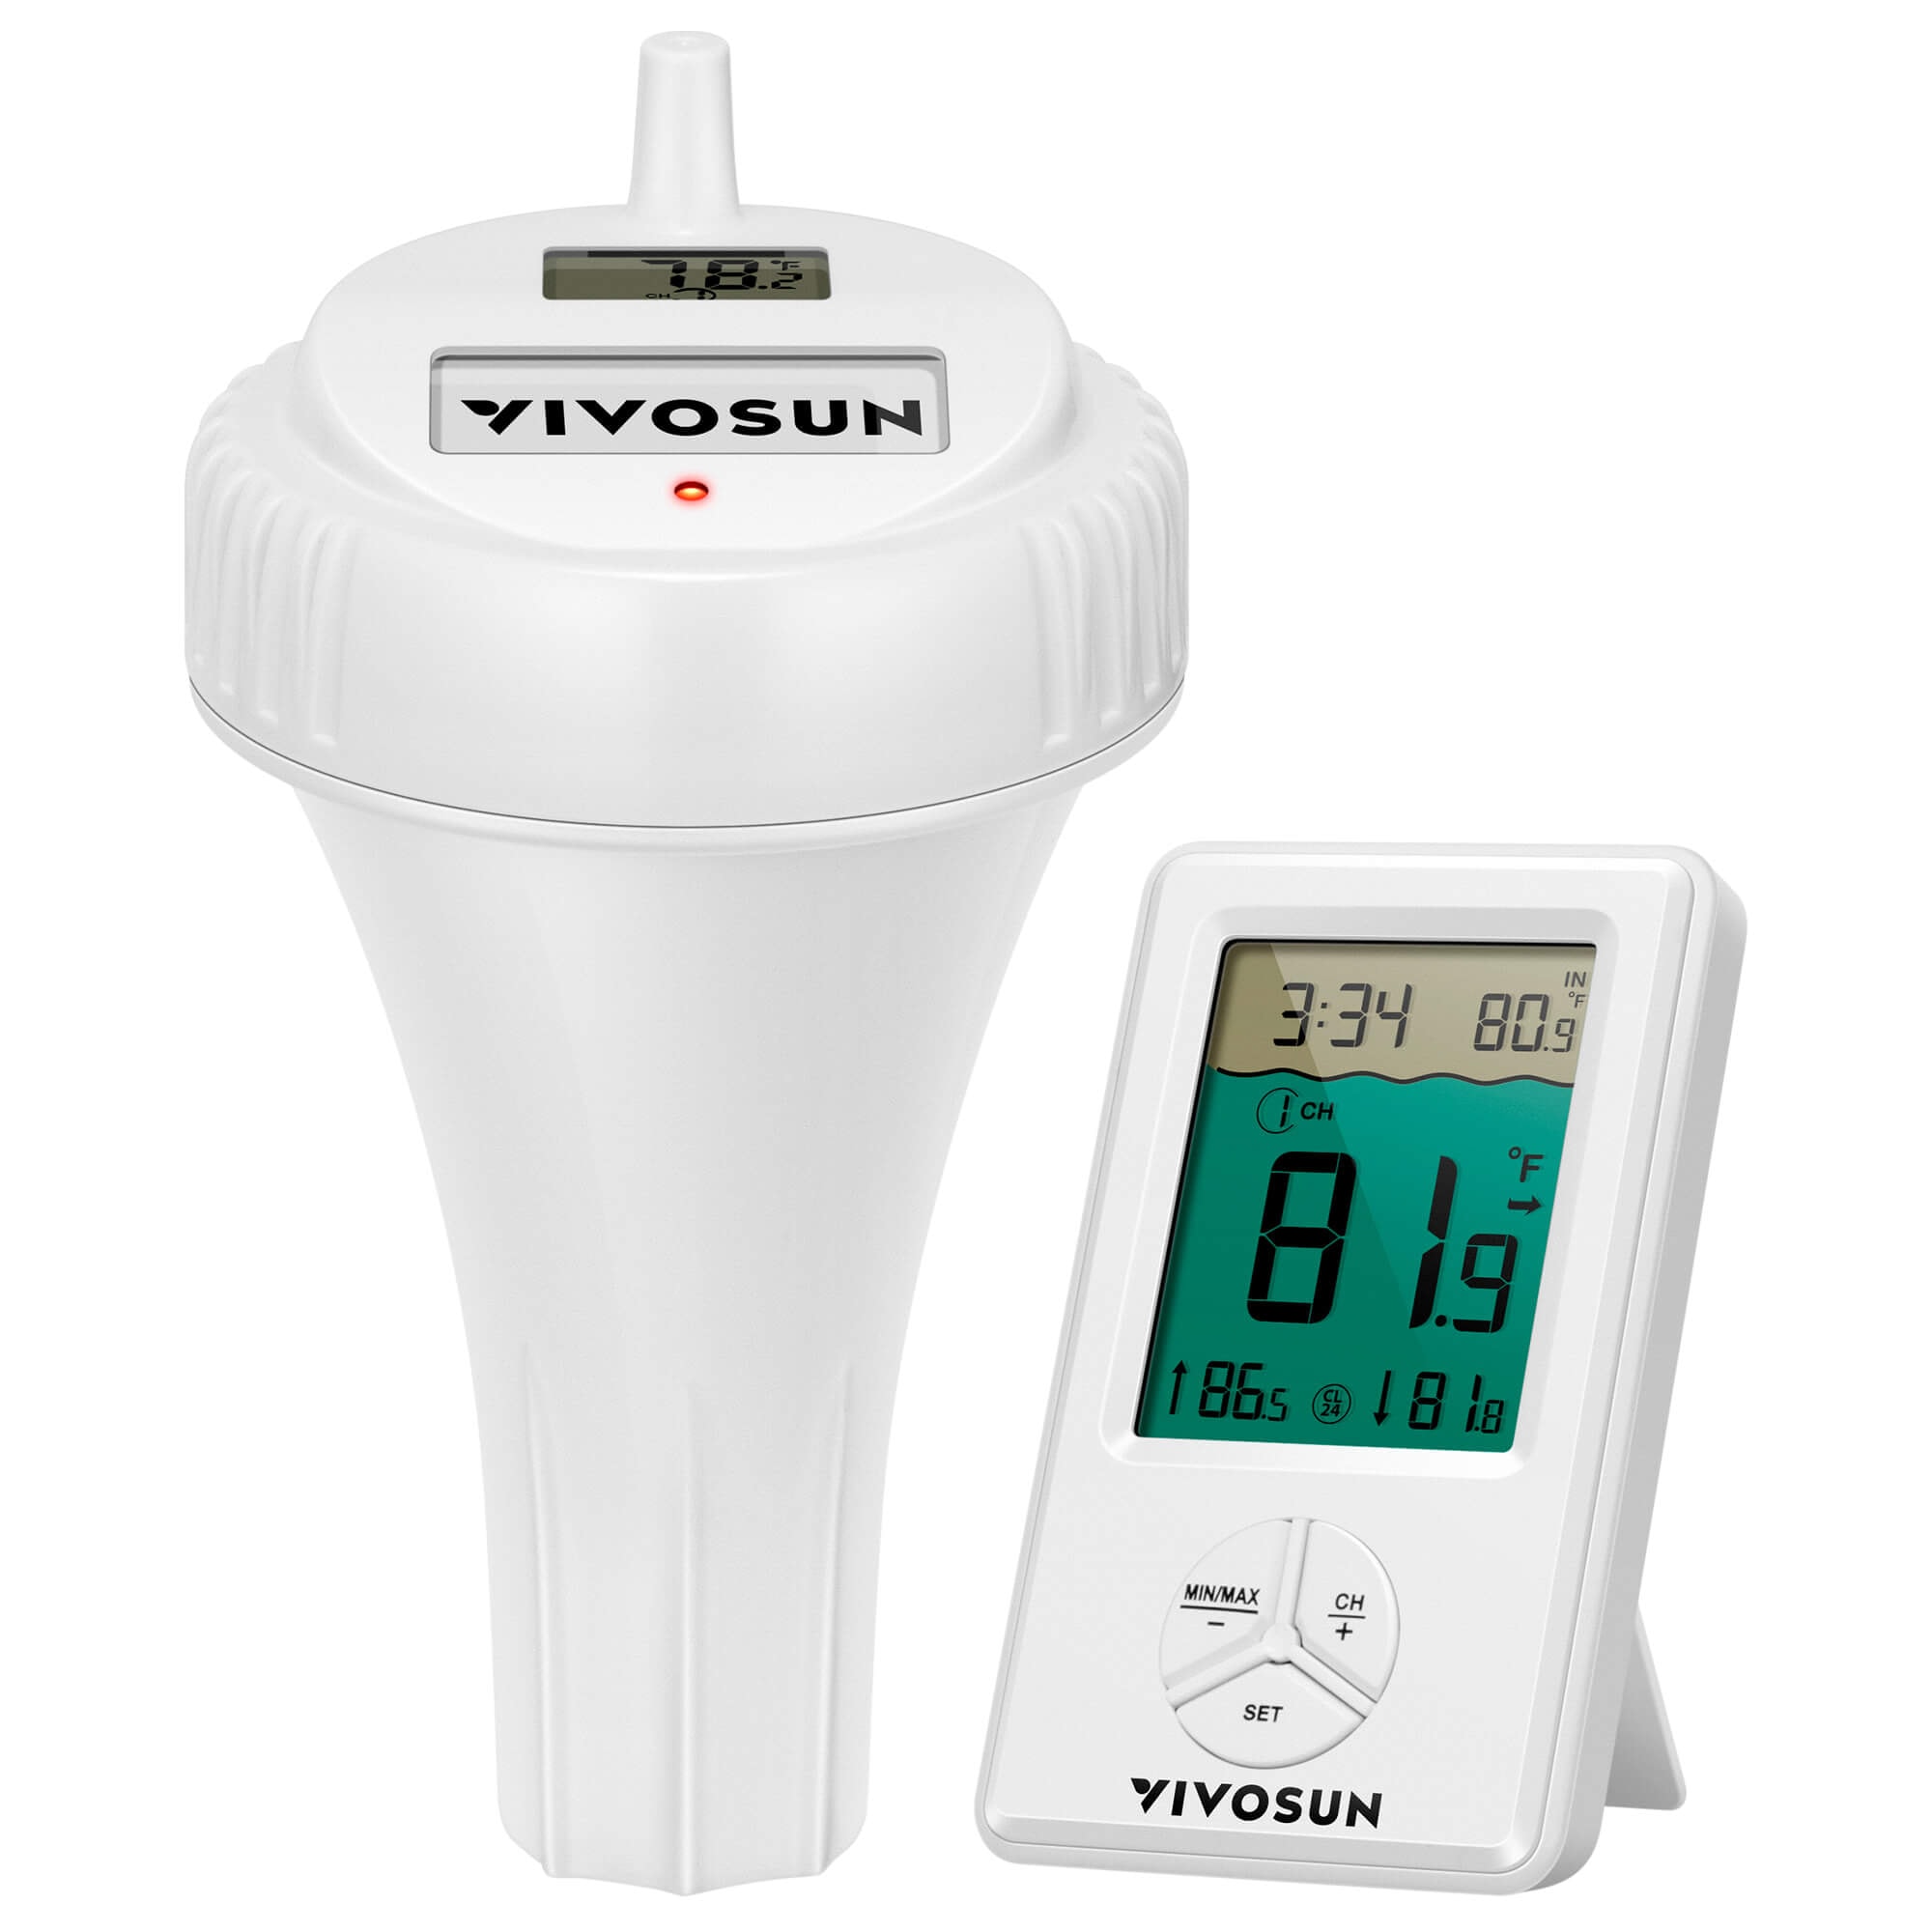  VIVOSUN Indoor Outdoor Thermometer Wireless Digital Hygrometer  Temperature and Humidity Monitor with Touchscreen LCD Backlight, and  AeroLab THB1 Bluetooth Hygrometer Thermometer : Patio, Lawn & Garden